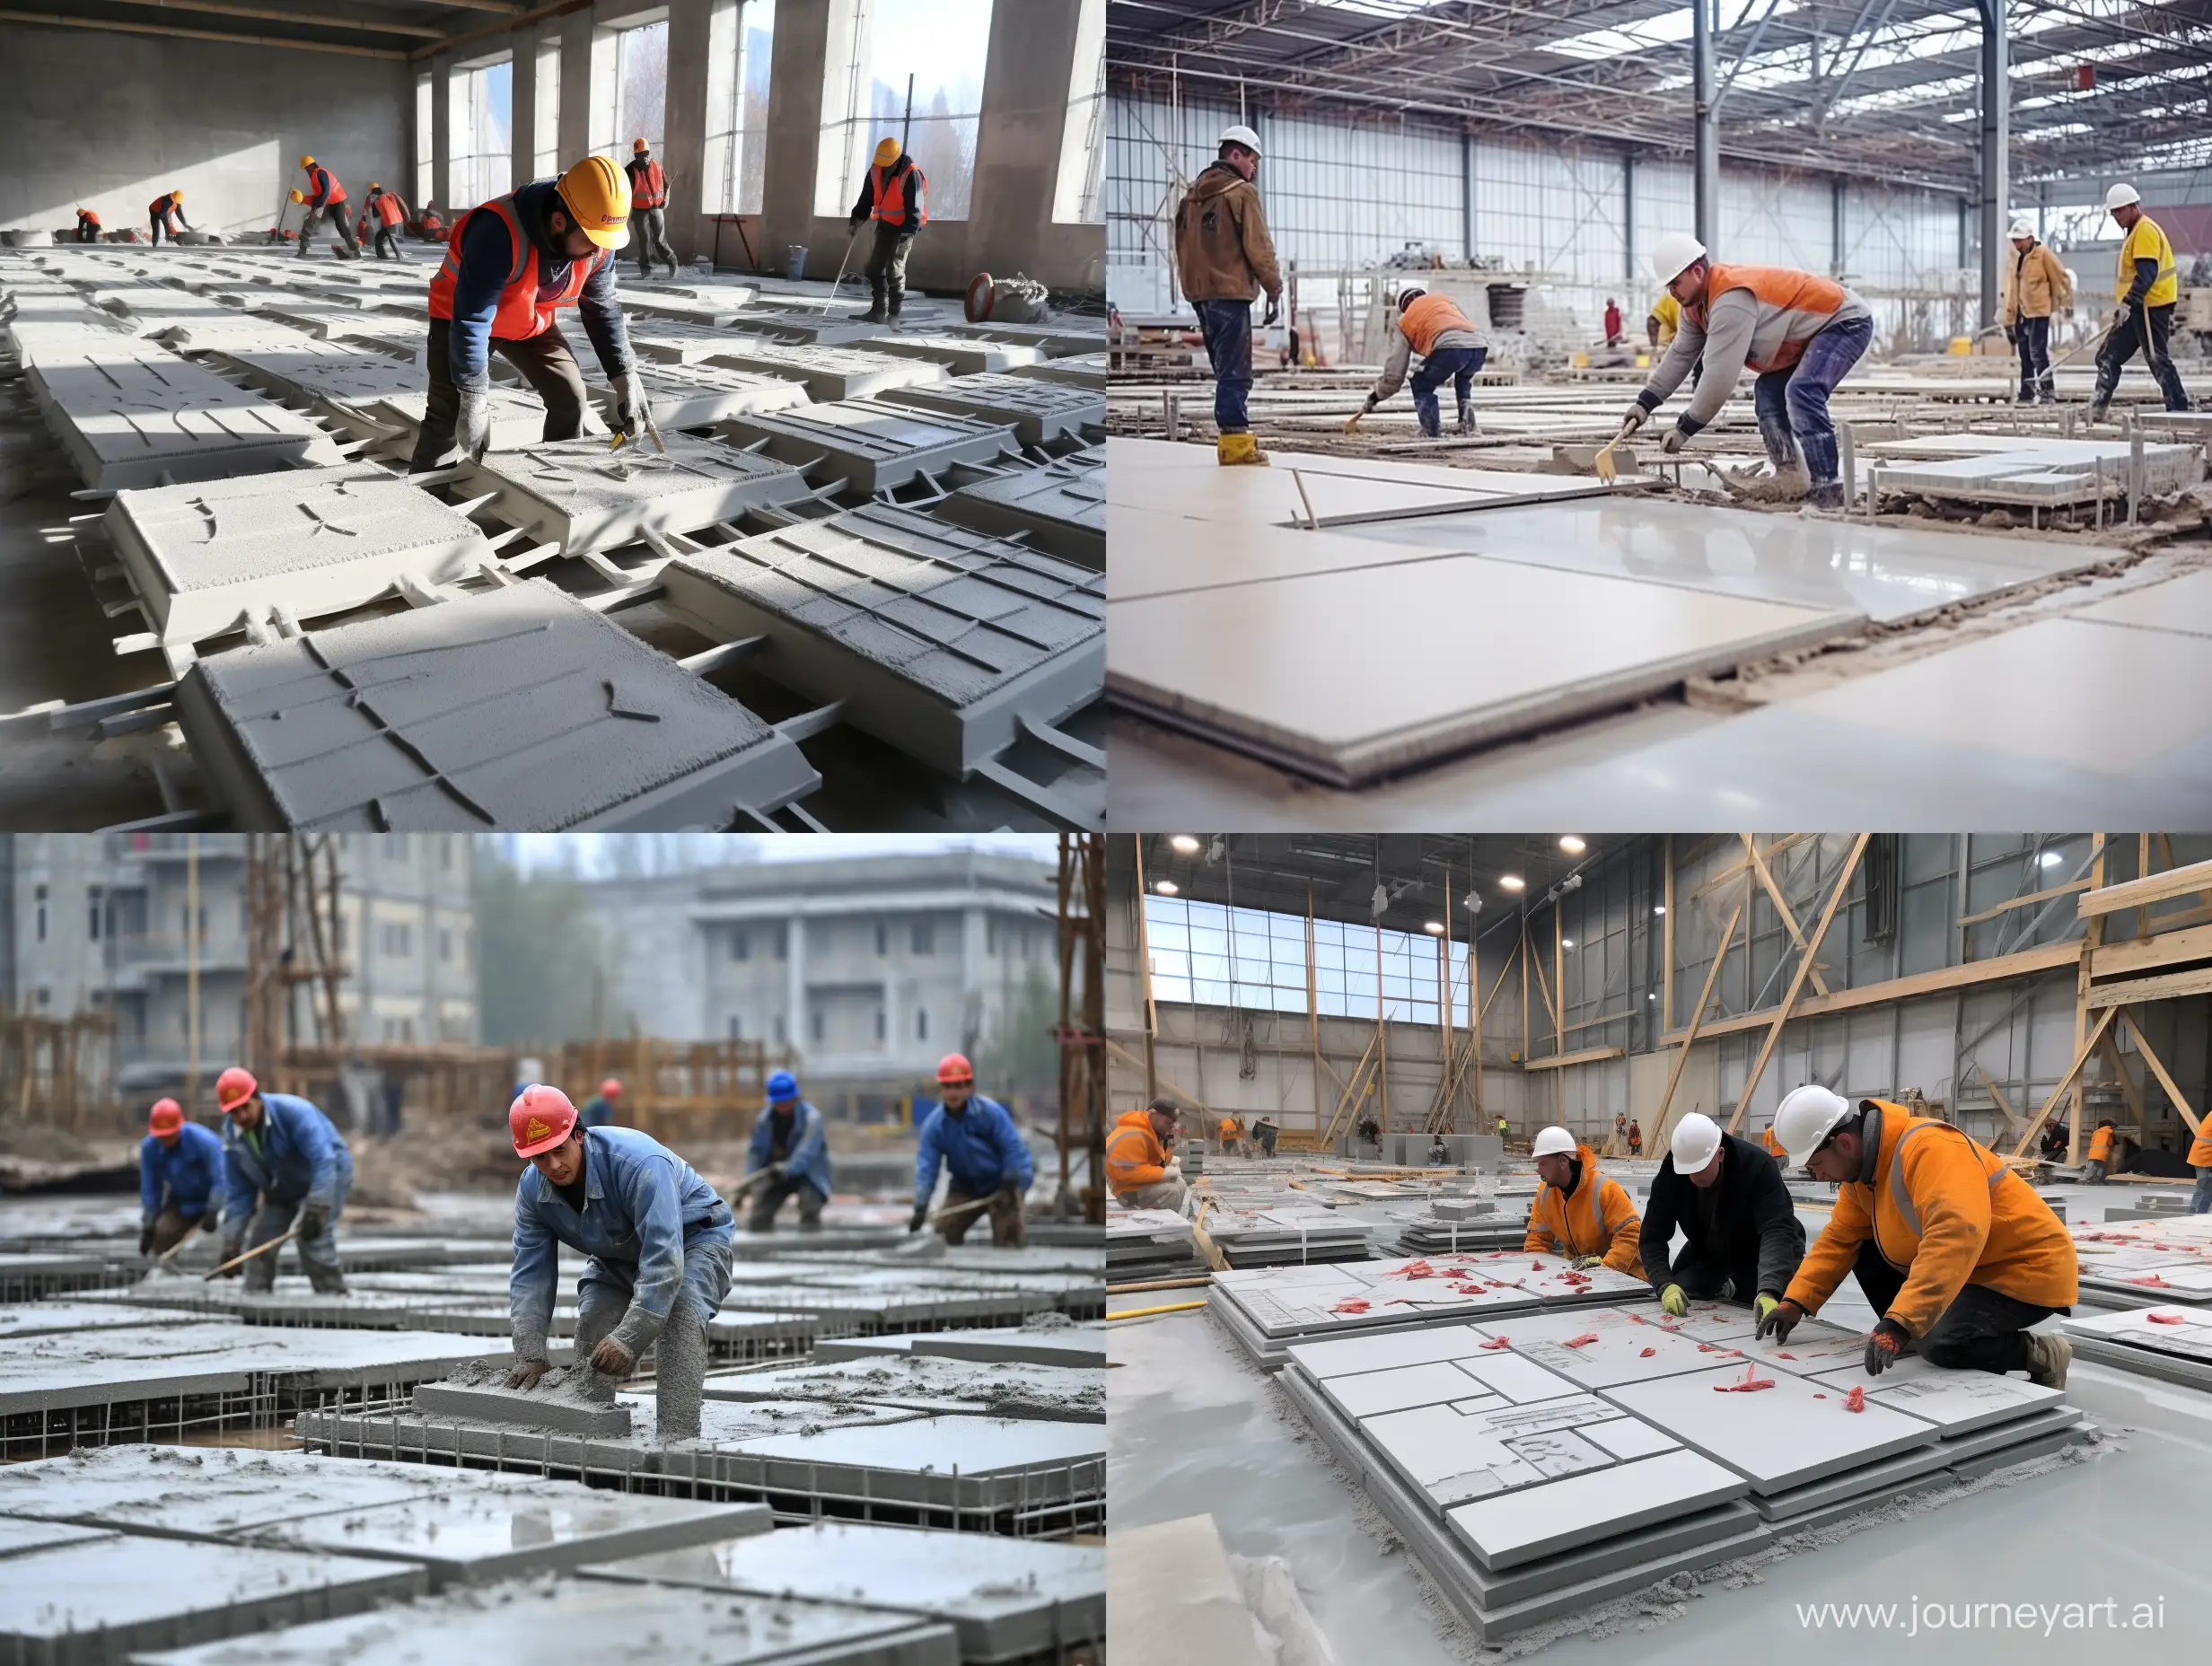 Skilled-Slavic-Workers-Crafting-Reinforced-Concrete-Floor-Slabs-for-Panel-Houses